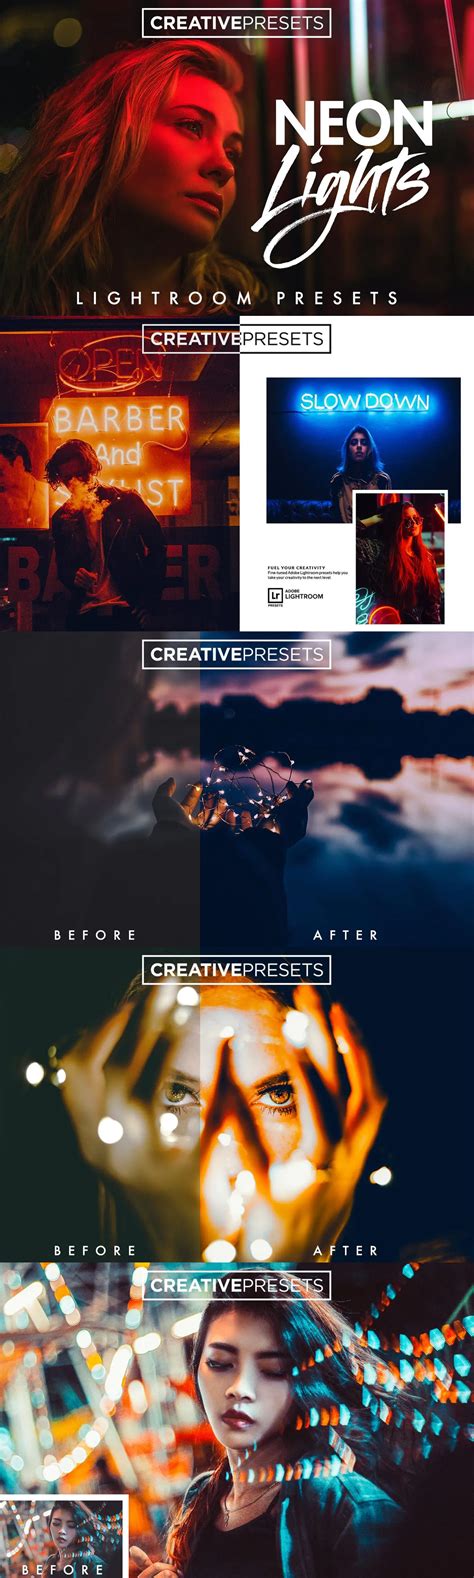 This dark green & lightroom preset is designed to create a catchy and sharp look that stands out from the rest, creating a unique smooth style, focusing on different shades. Neon Lights Lightroom Presets in 2020 | Lightroom presets ...